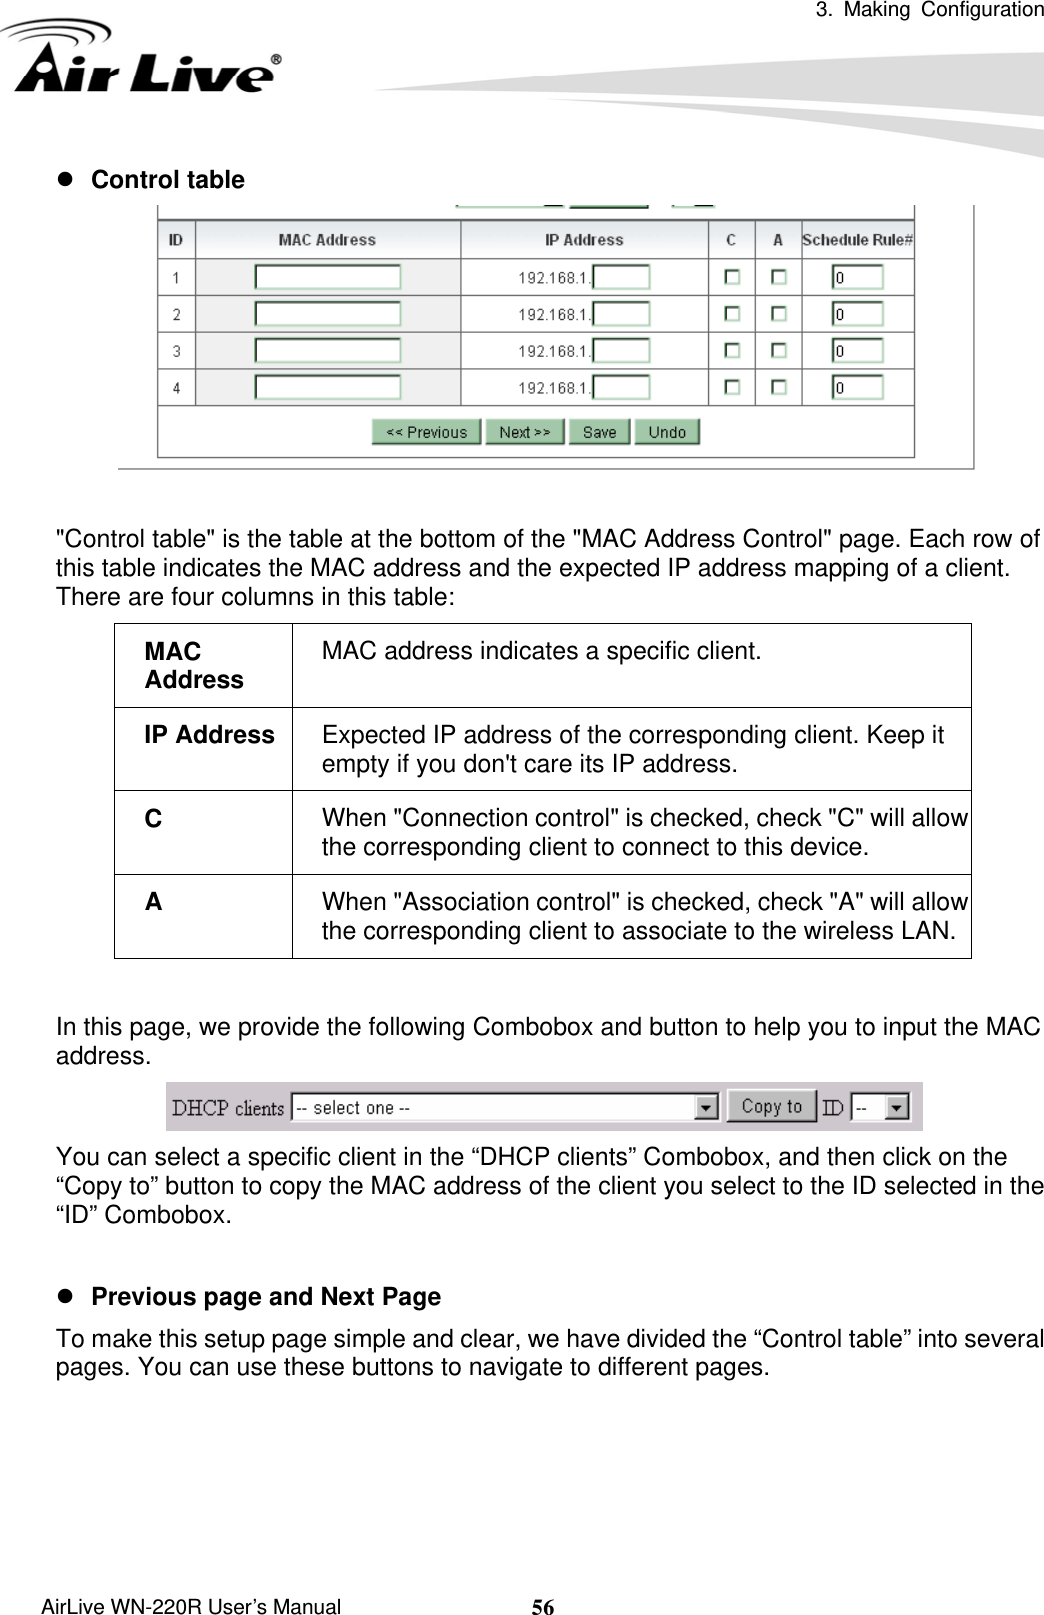  3. Making Configuration       AirLive WN-220R User’s Manual  56z Control table   &quot;Control table&quot; is the table at the bottom of the &quot;MAC Address Control&quot; page. Each row of this table indicates the MAC address and the expected IP address mapping of a client. There are four columns in this table: MAC address indicates a specific client. MAC Address Expected IP address of the corresponding client. Keep it empty if you don&apos;t care its IP address. IP Address When &quot;Connection control&quot; is checked, check &quot;C&quot; will allow the corresponding client to connect to this device. C When &quot;Association control&quot; is checked, check &quot;A&quot; will allow the corresponding client to associate to the wireless LAN.A  In this page, we provide the following Combobox and button to help you to input the MAC address.  You can select a specific client in the “DHCP clients” Combobox, and then click on the “Copy to” button to copy the MAC address of the client you select to the ID selected in the “ID” Combobox.  z Previous page and Next Page  To make this setup page simple and clear, we have divided the “Control table” into several pages. You can use these buttons to navigate to different pages. 